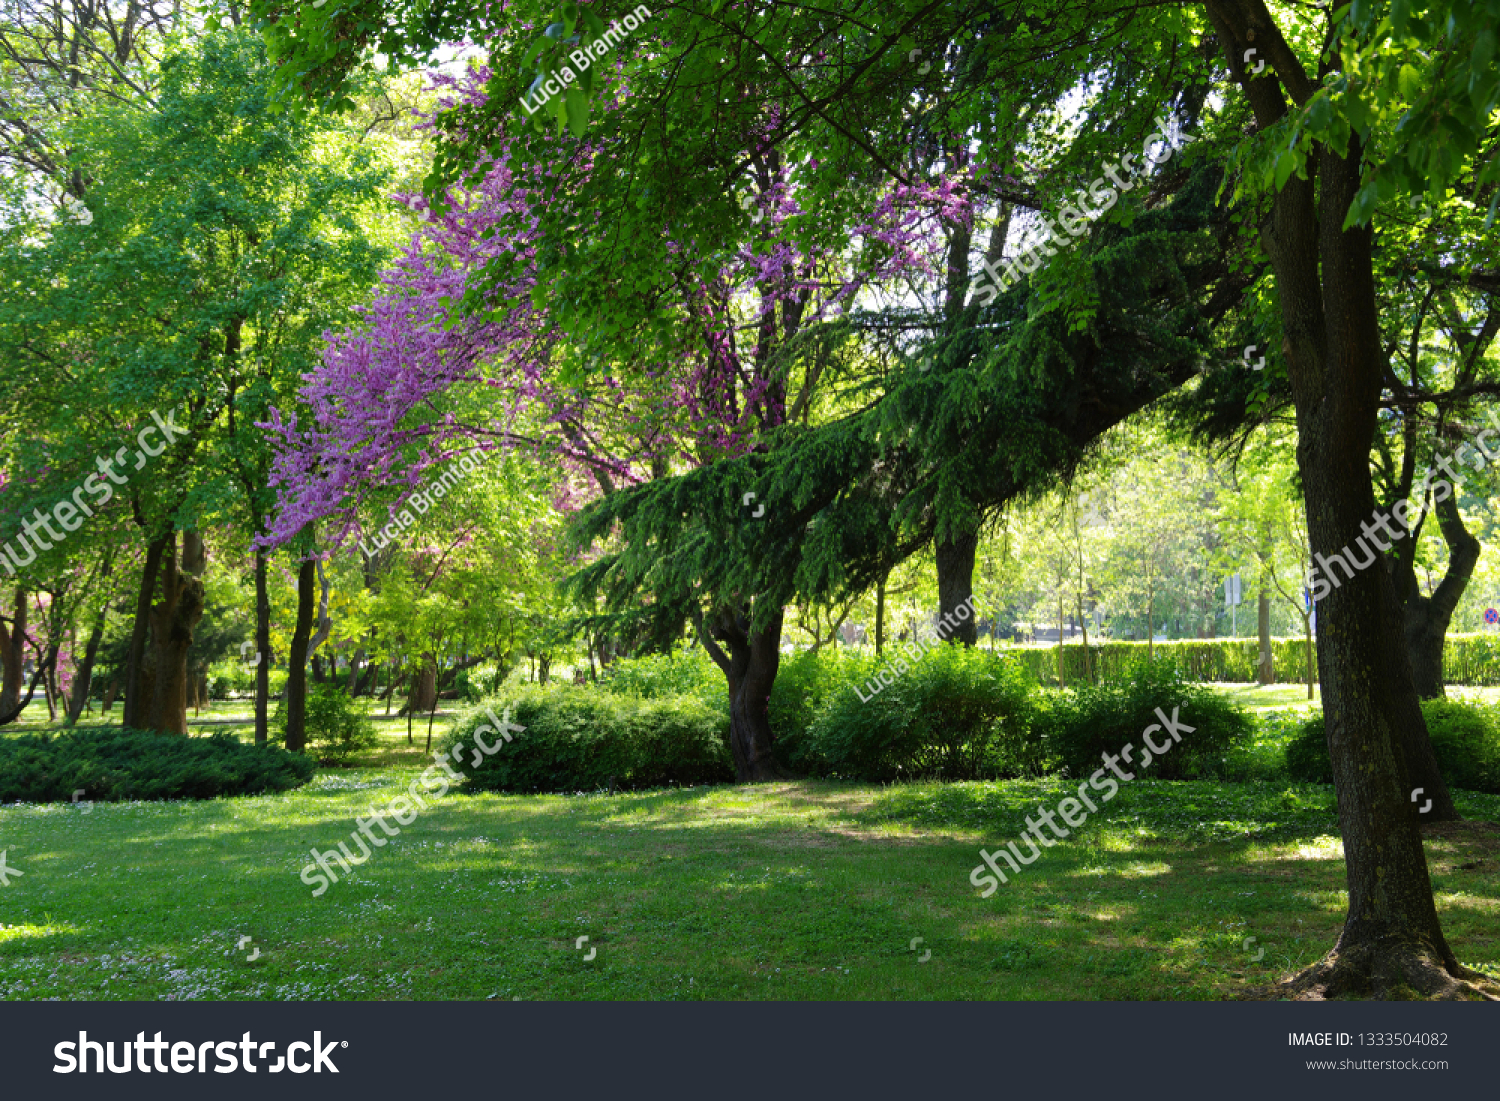 Blooming Eastern Redbud (Cercis canadensis) in a park among green trees #1333504082